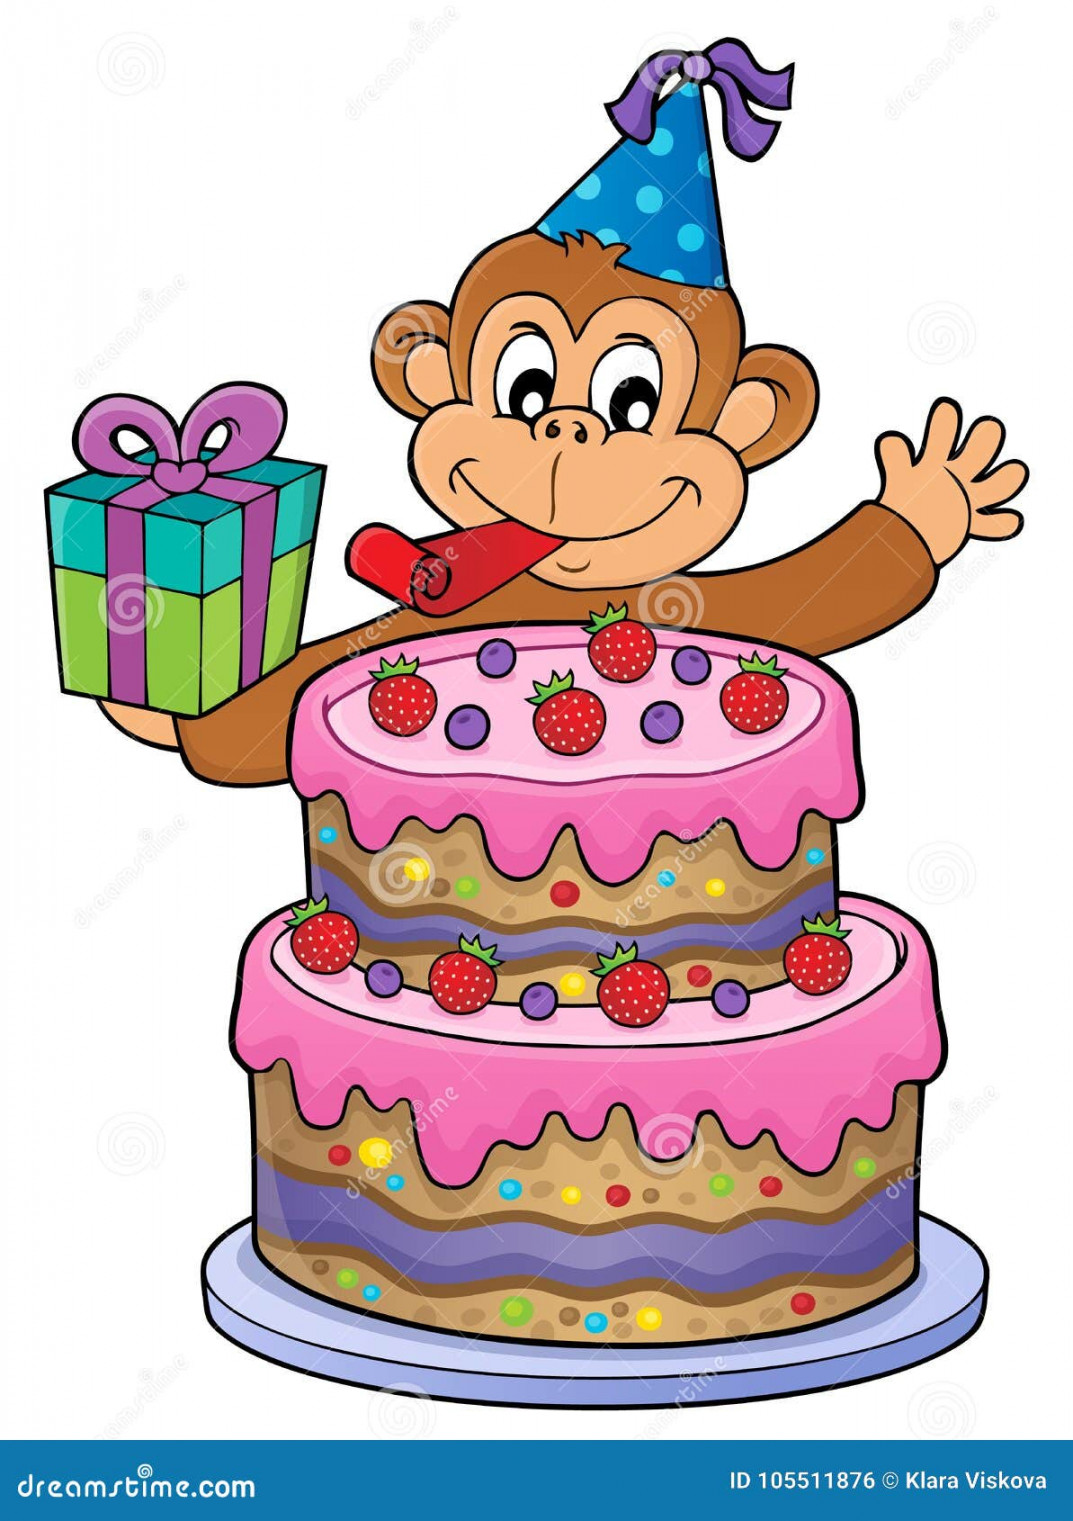 Cake and Party Monkey Theme  Stock Vector - Illustration of cute